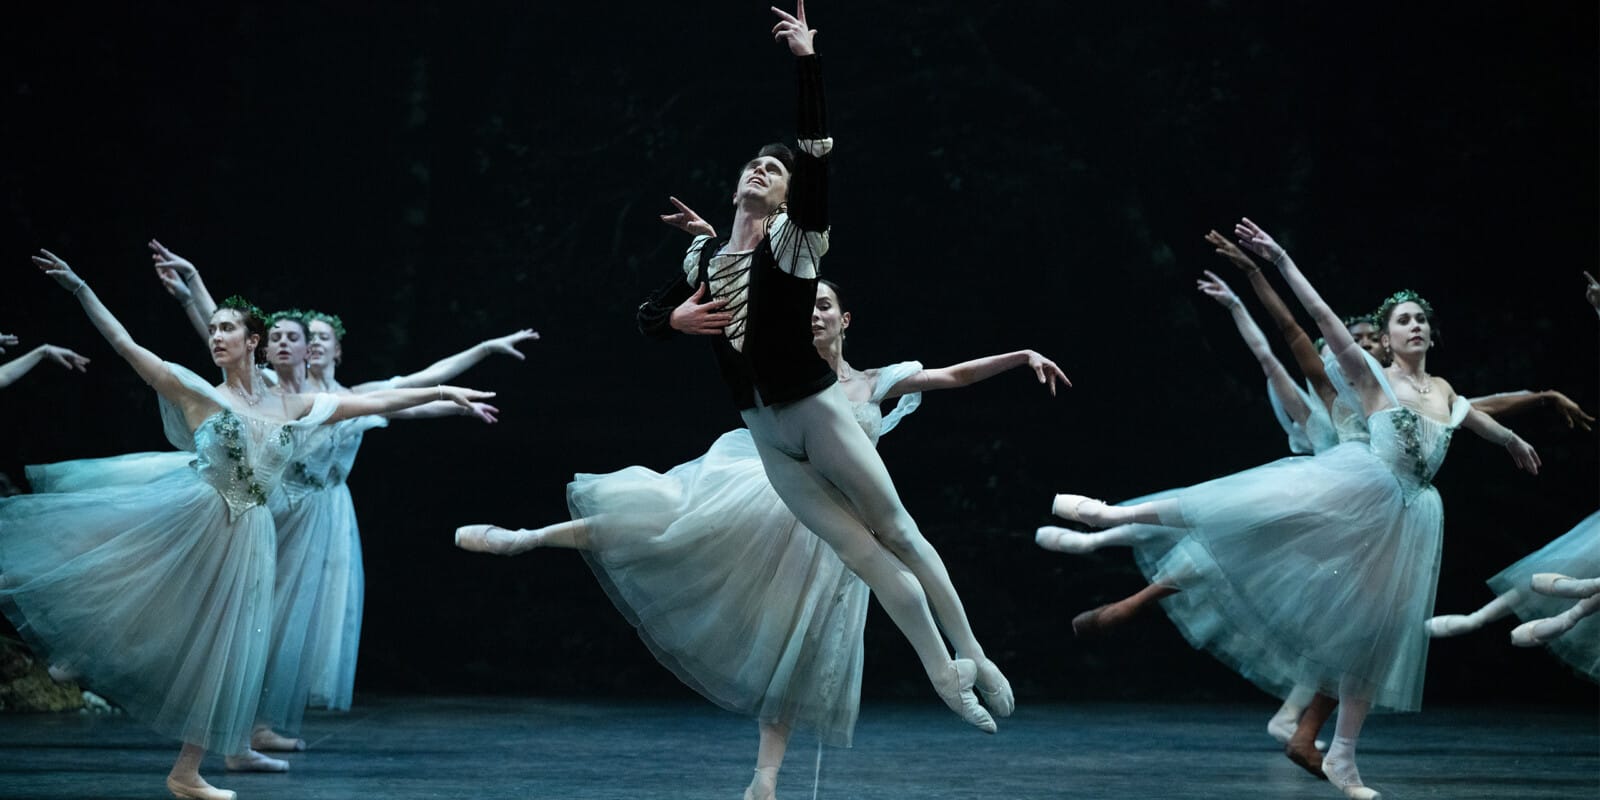 Aitor Arrieta and English National Ballet dancers in Mary Skeaping's Giselle (c) Laurent Liotardo